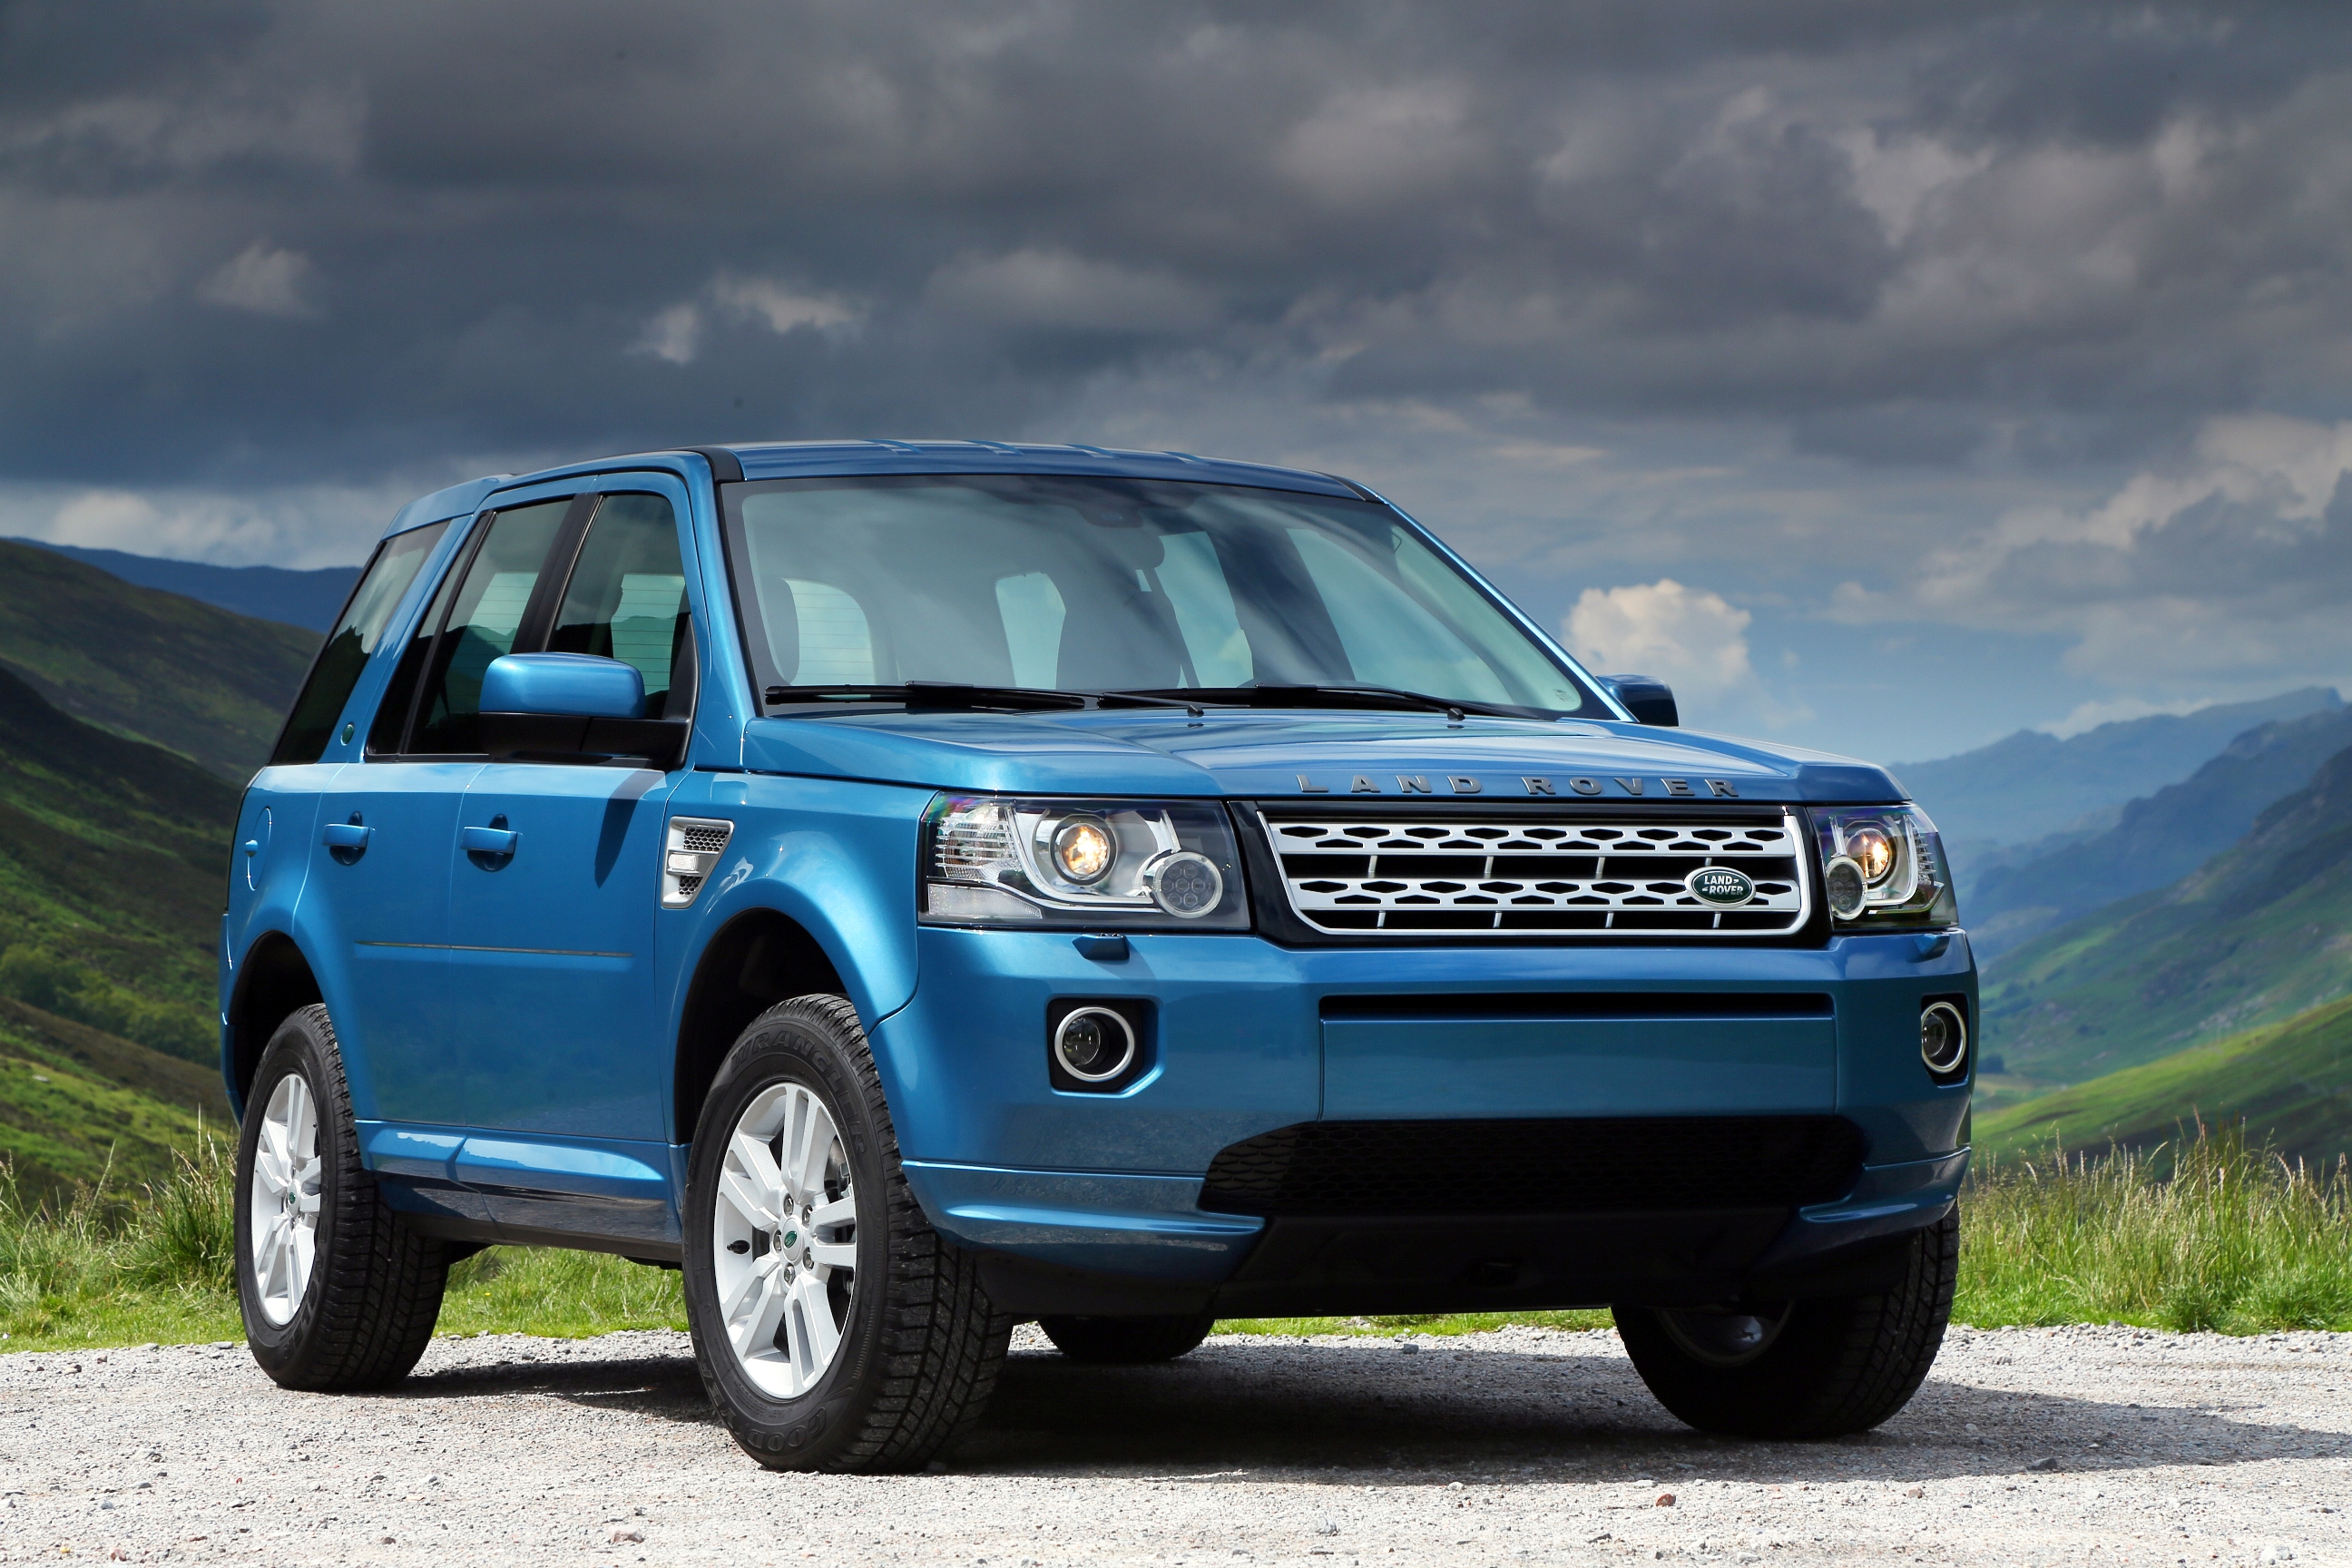 Land Rover Freelander 2 facelift launched Car News